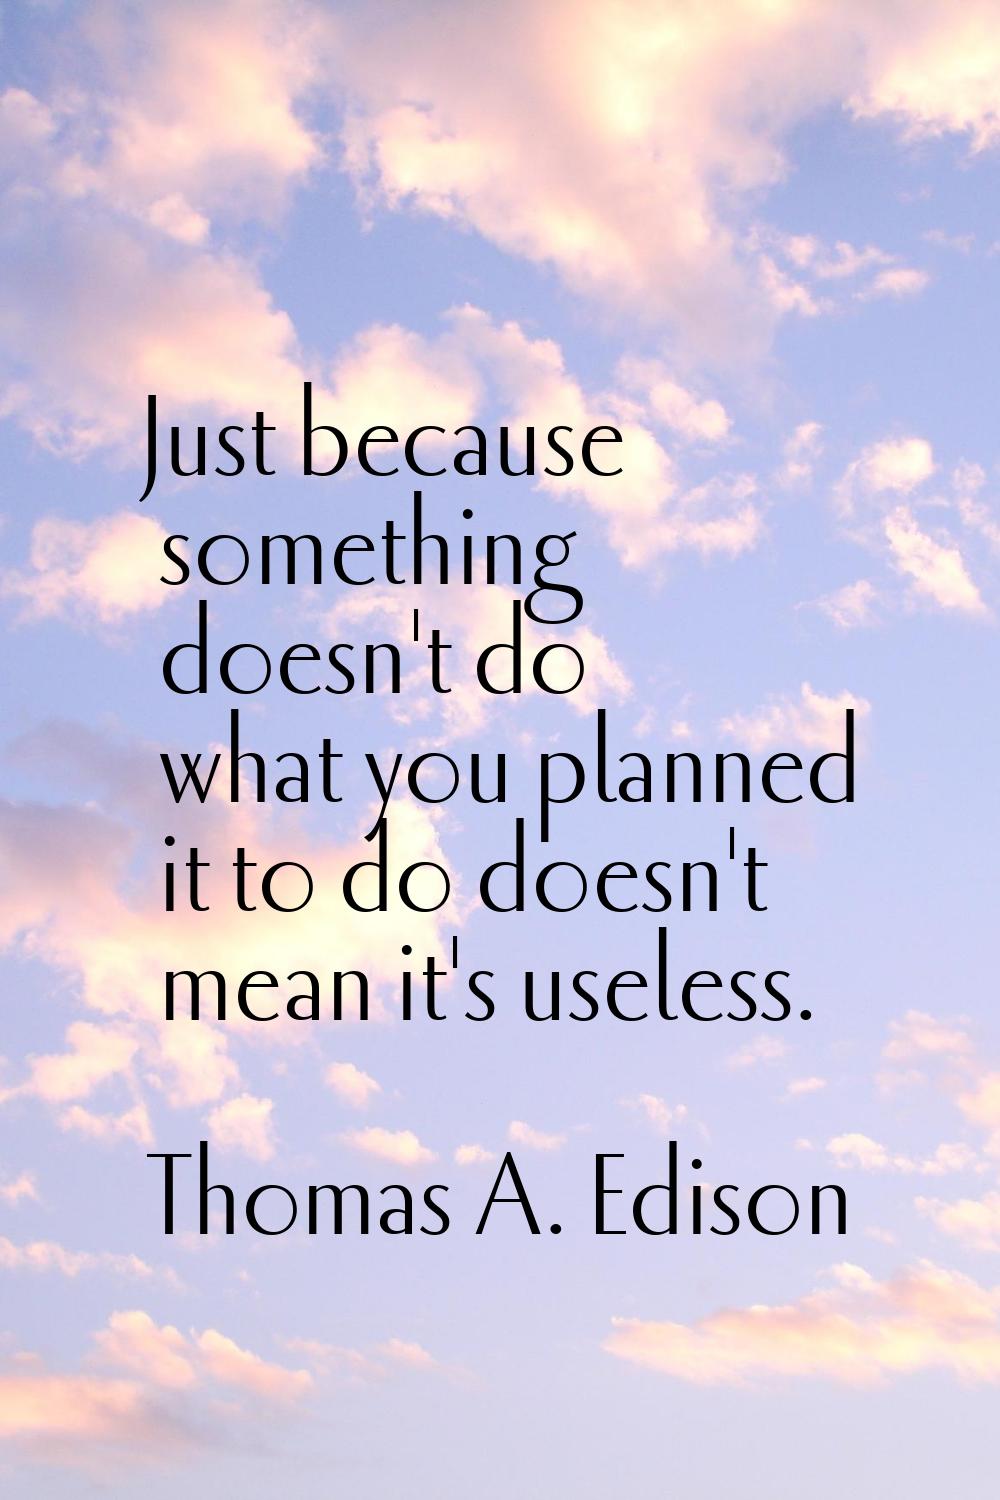 Just because something doesn't do what you planned it to do doesn't mean it's useless.